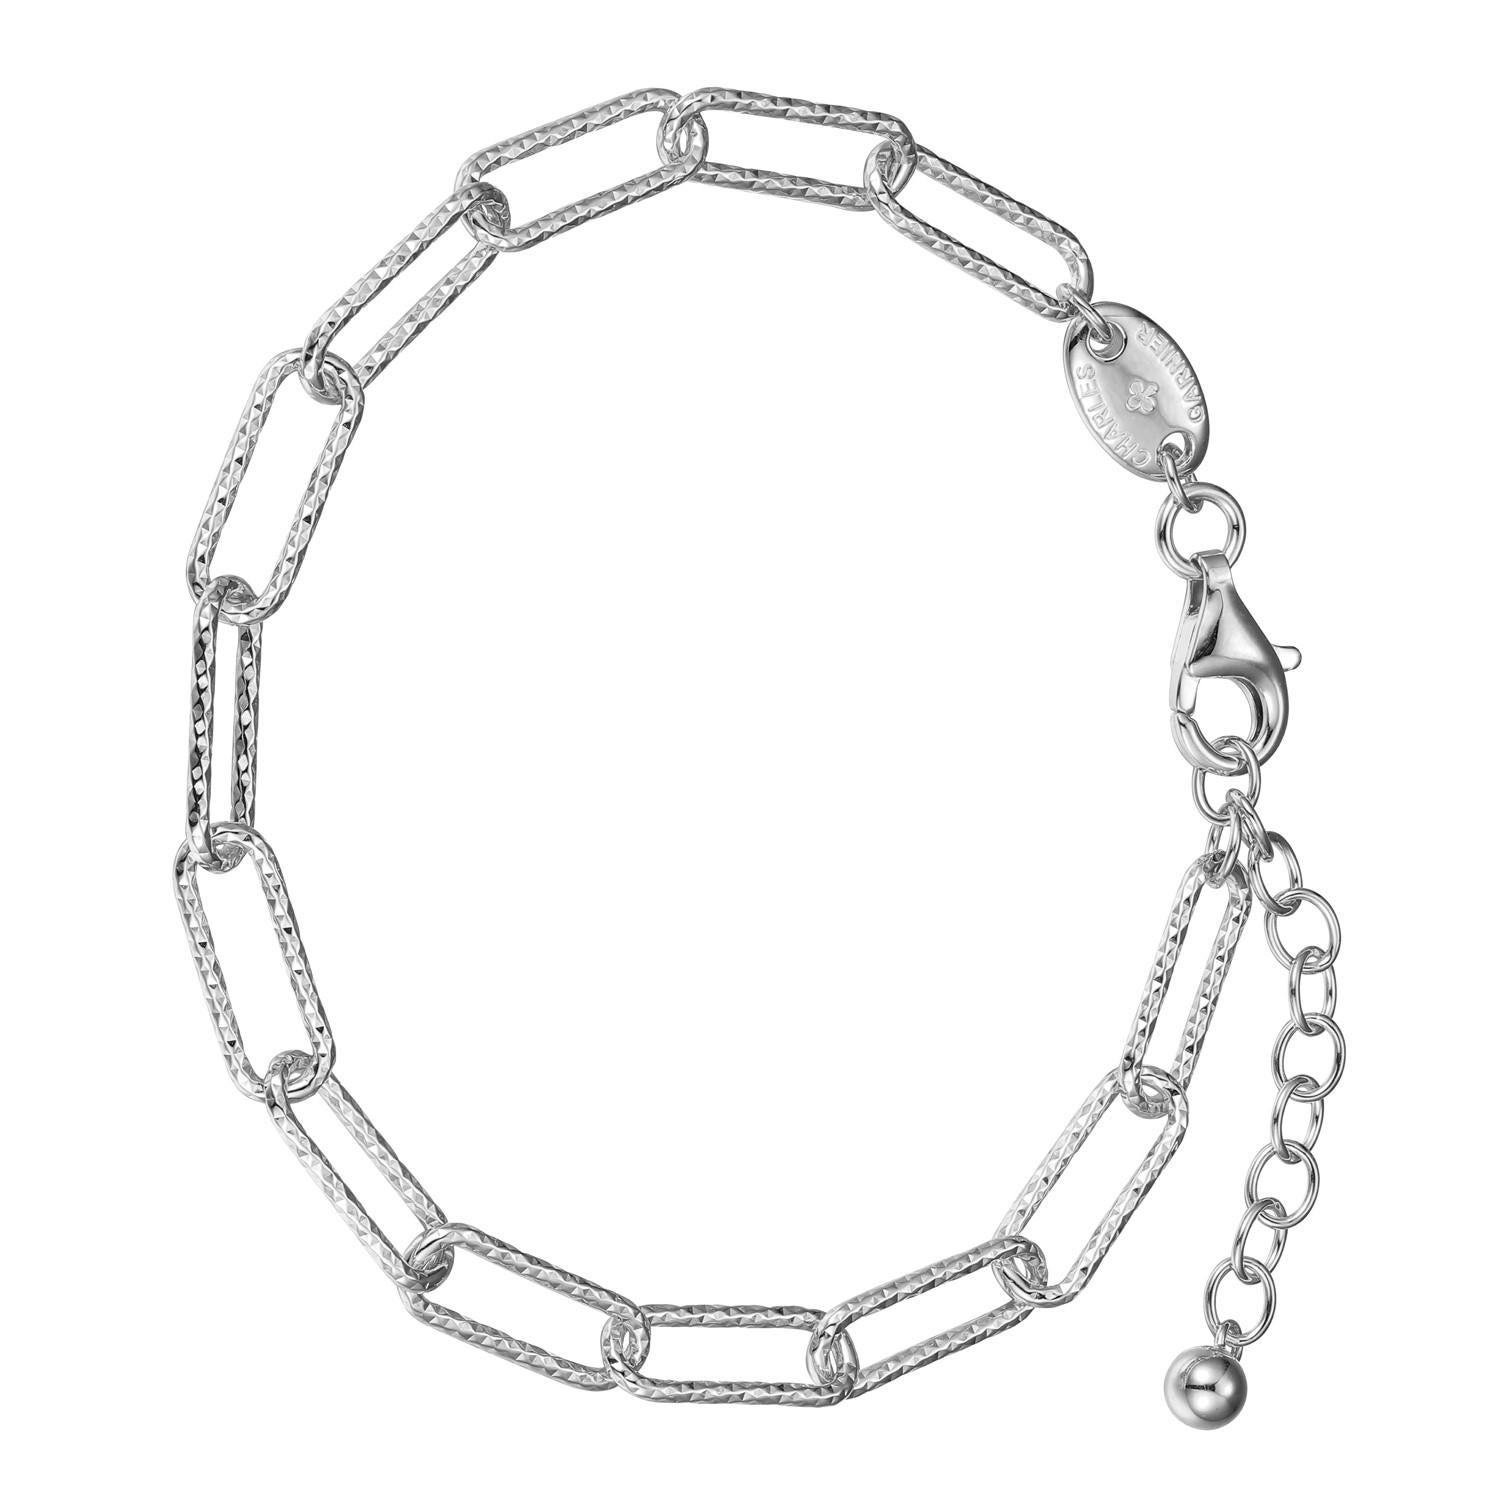 Sterling Silver Bracelet made with Diamond Cut Paperclip Chain (5mm), Measures 6.75